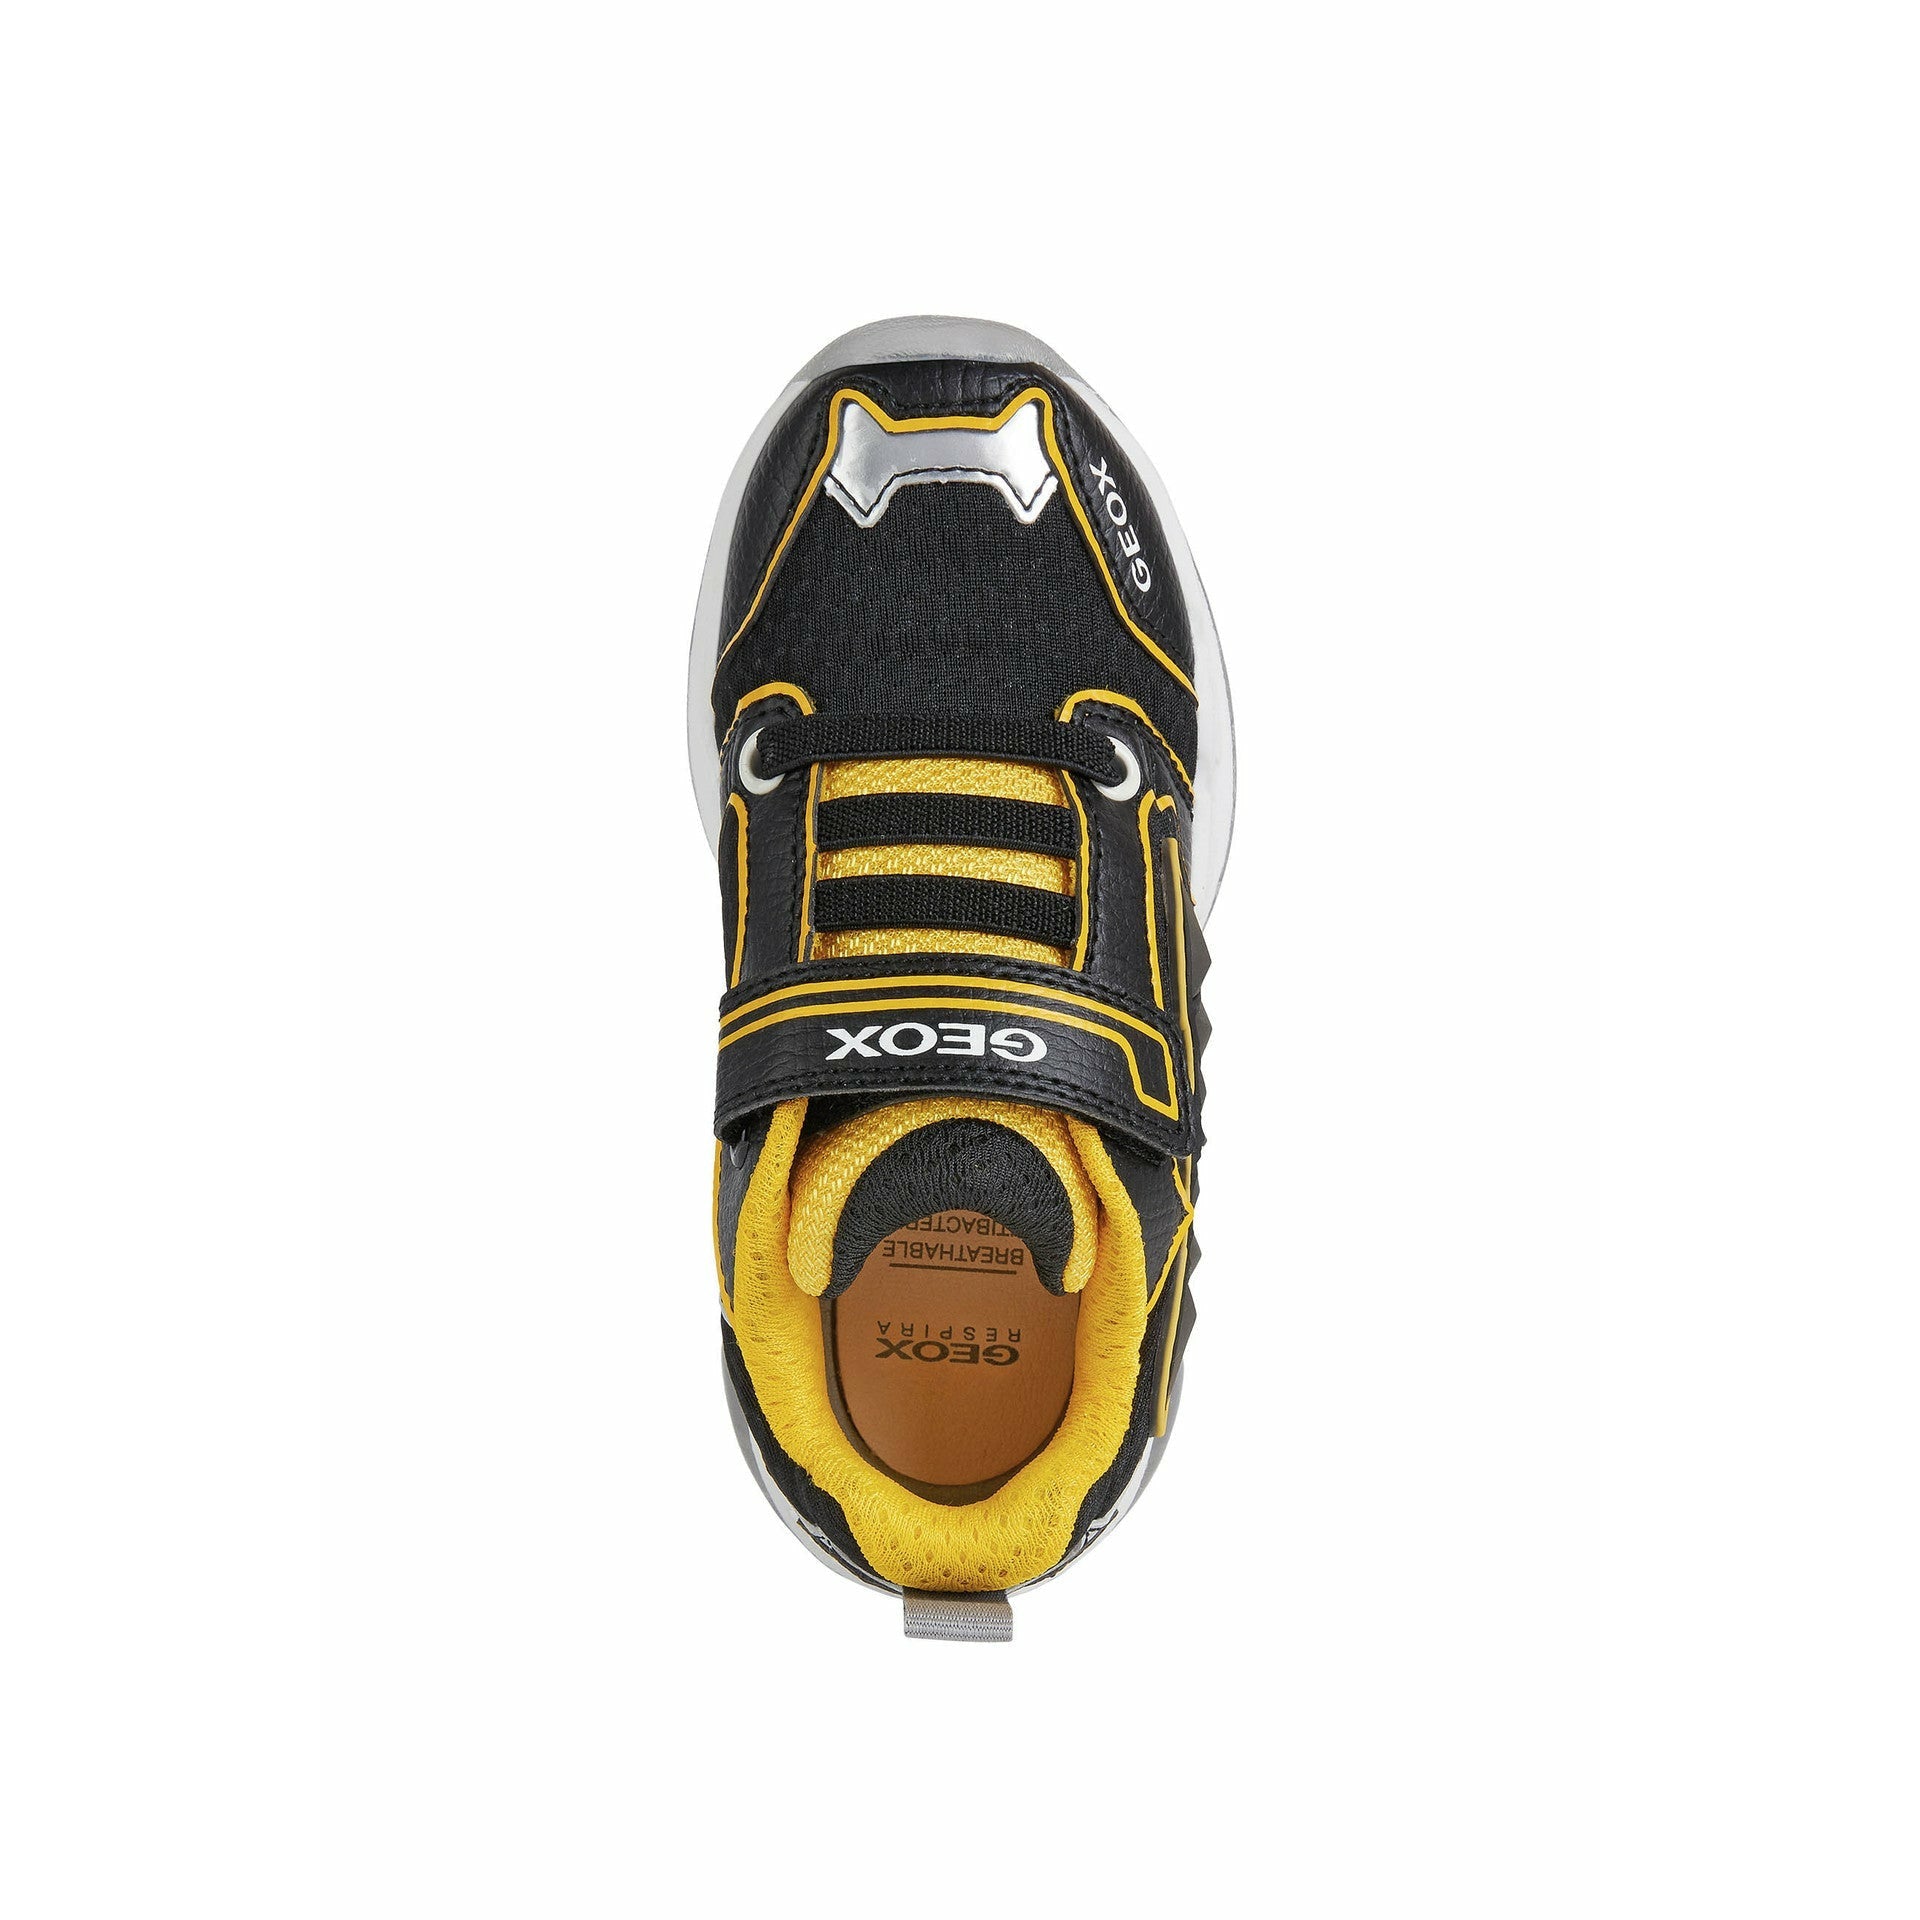 Geox Spaziale  - Boys Velcro Trainer with Lights in Black/Yellow | Geox Shoes | Childrens Shoe Fitting | Wisemans | Bantry | West Cork | Ireland